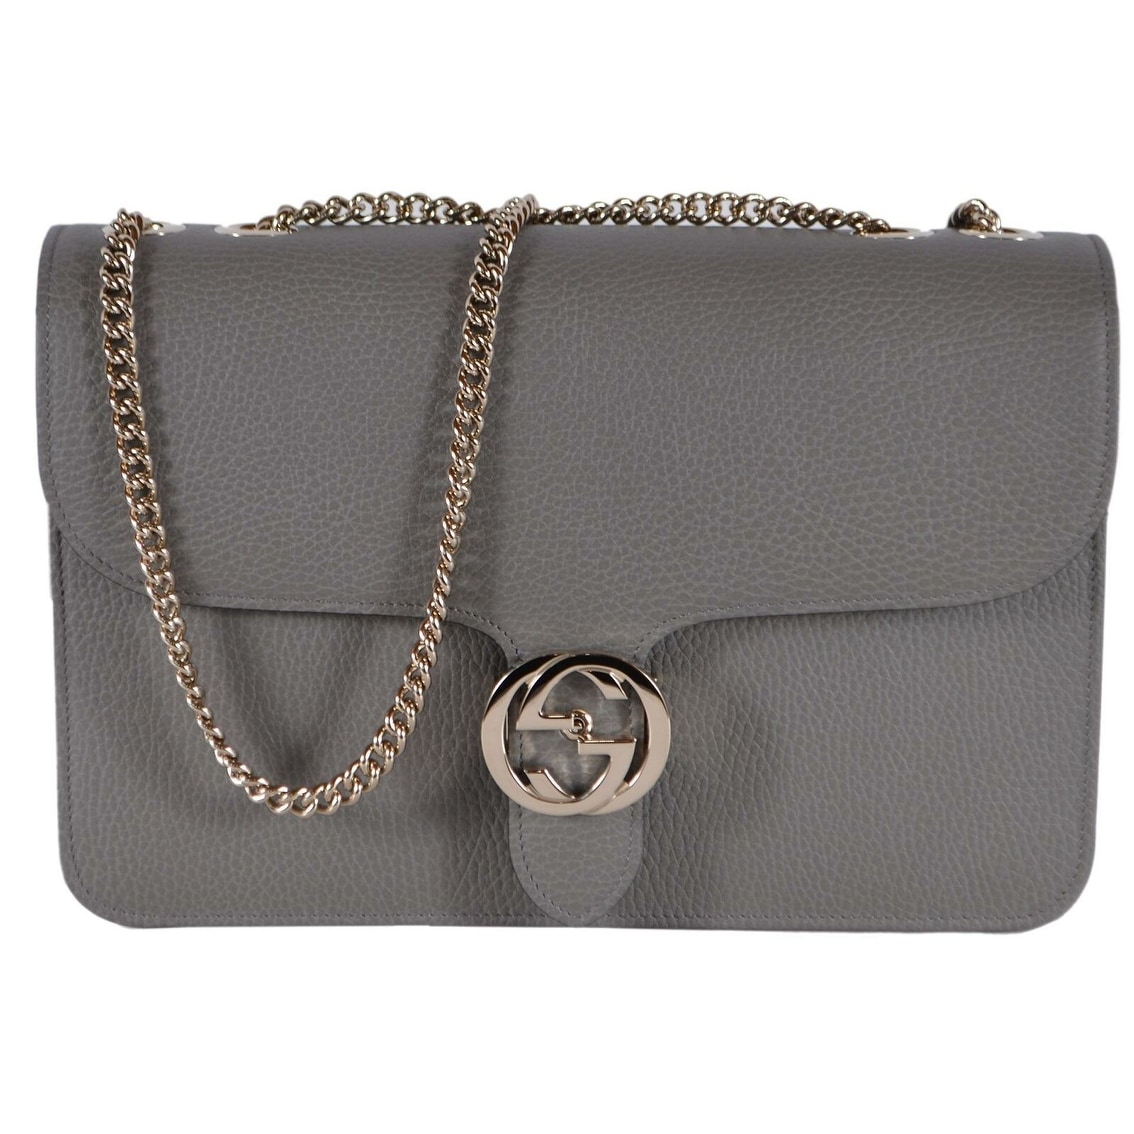 gucci purse grey off 60% - online-sms.in